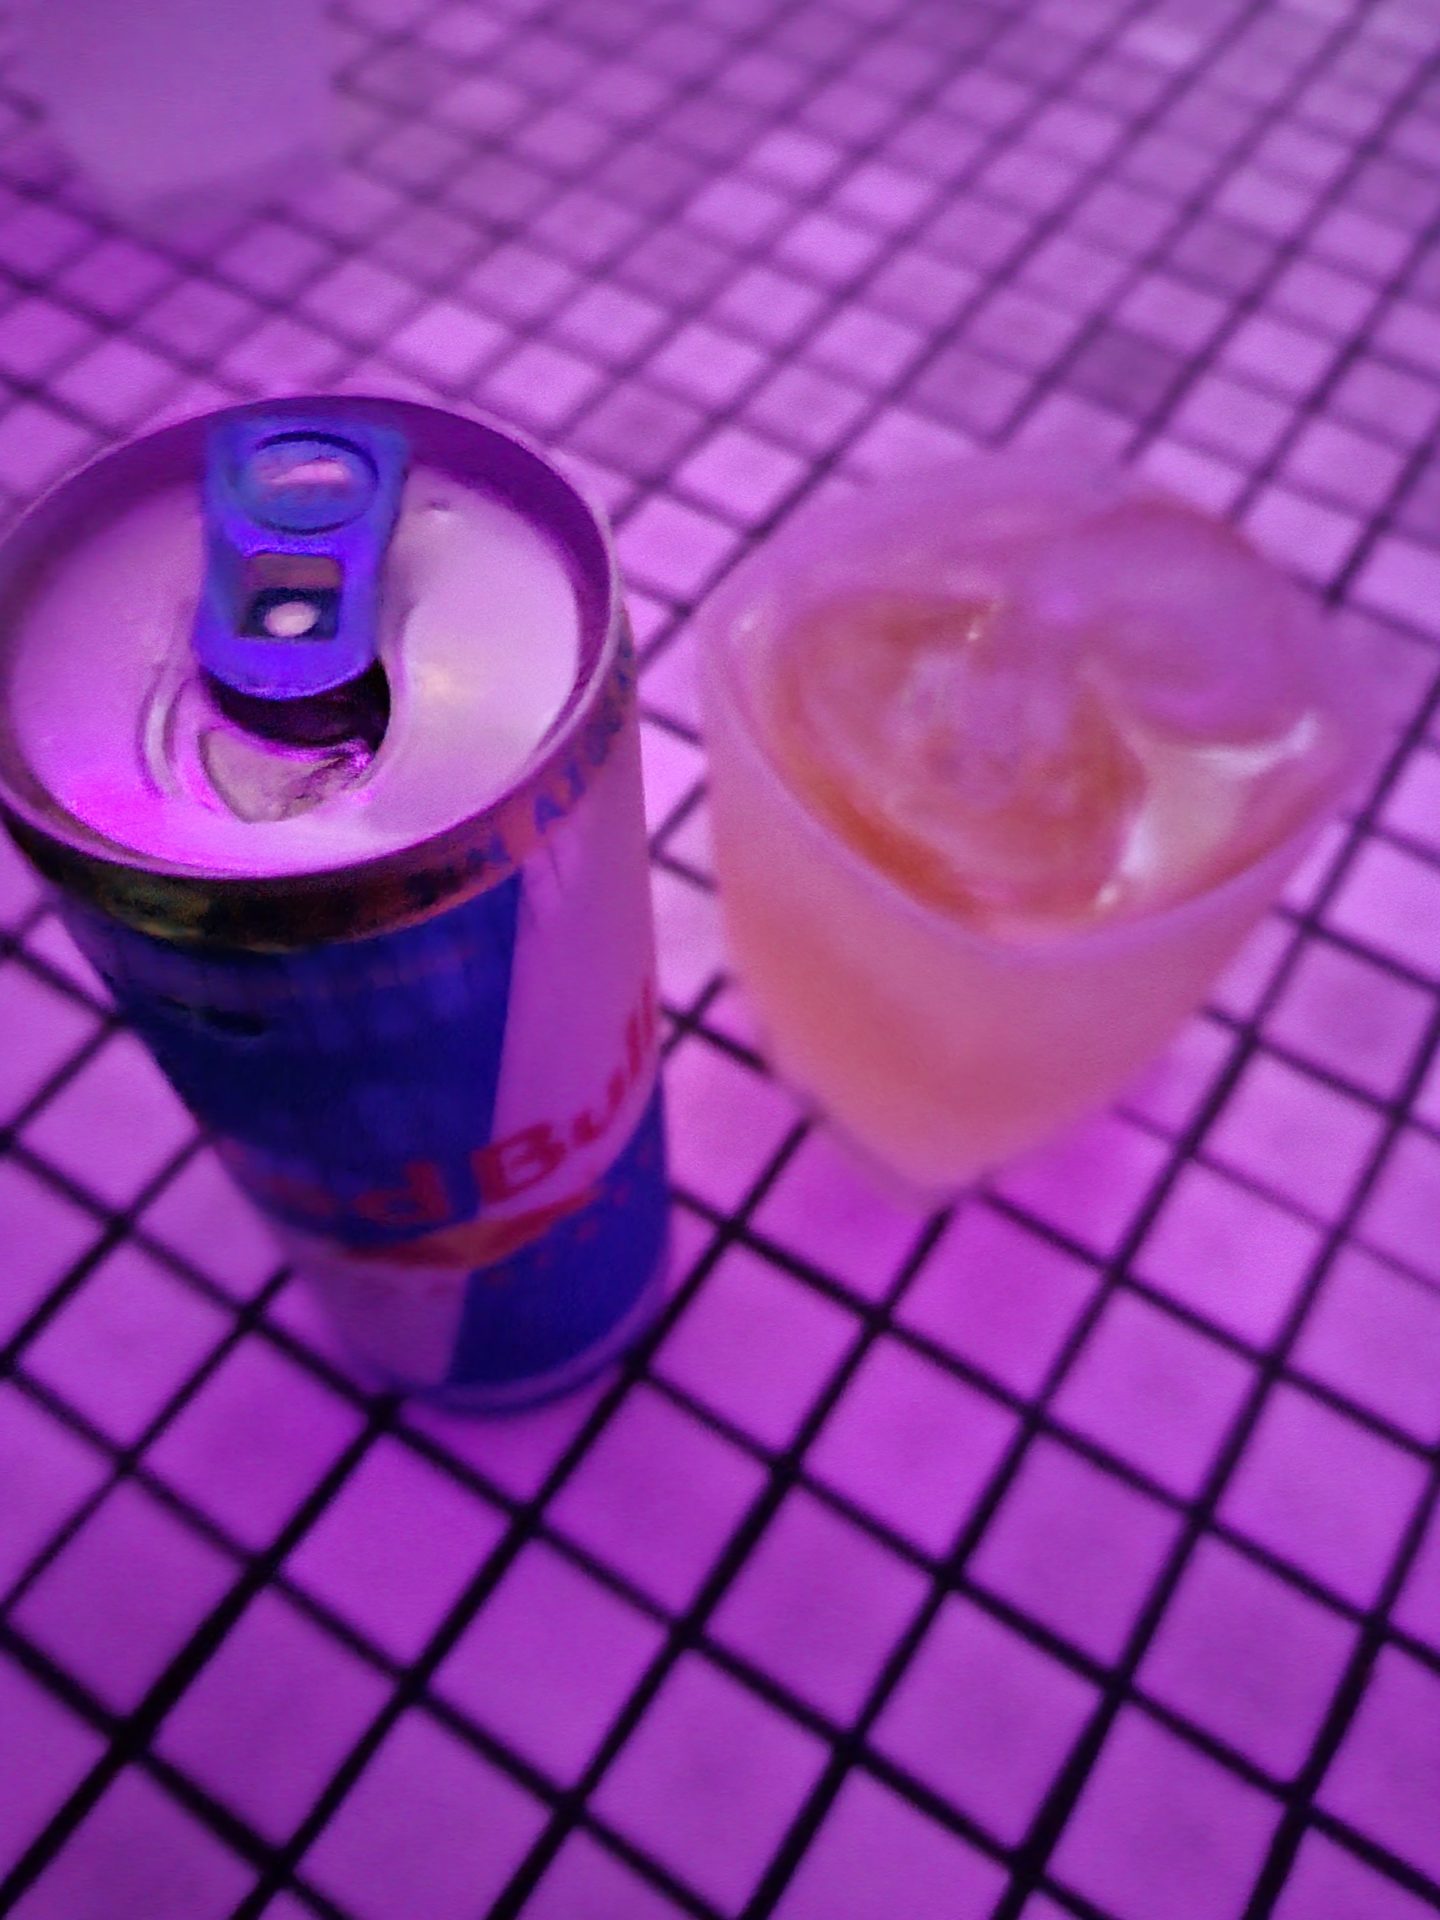 a can and a drink on a tile surface